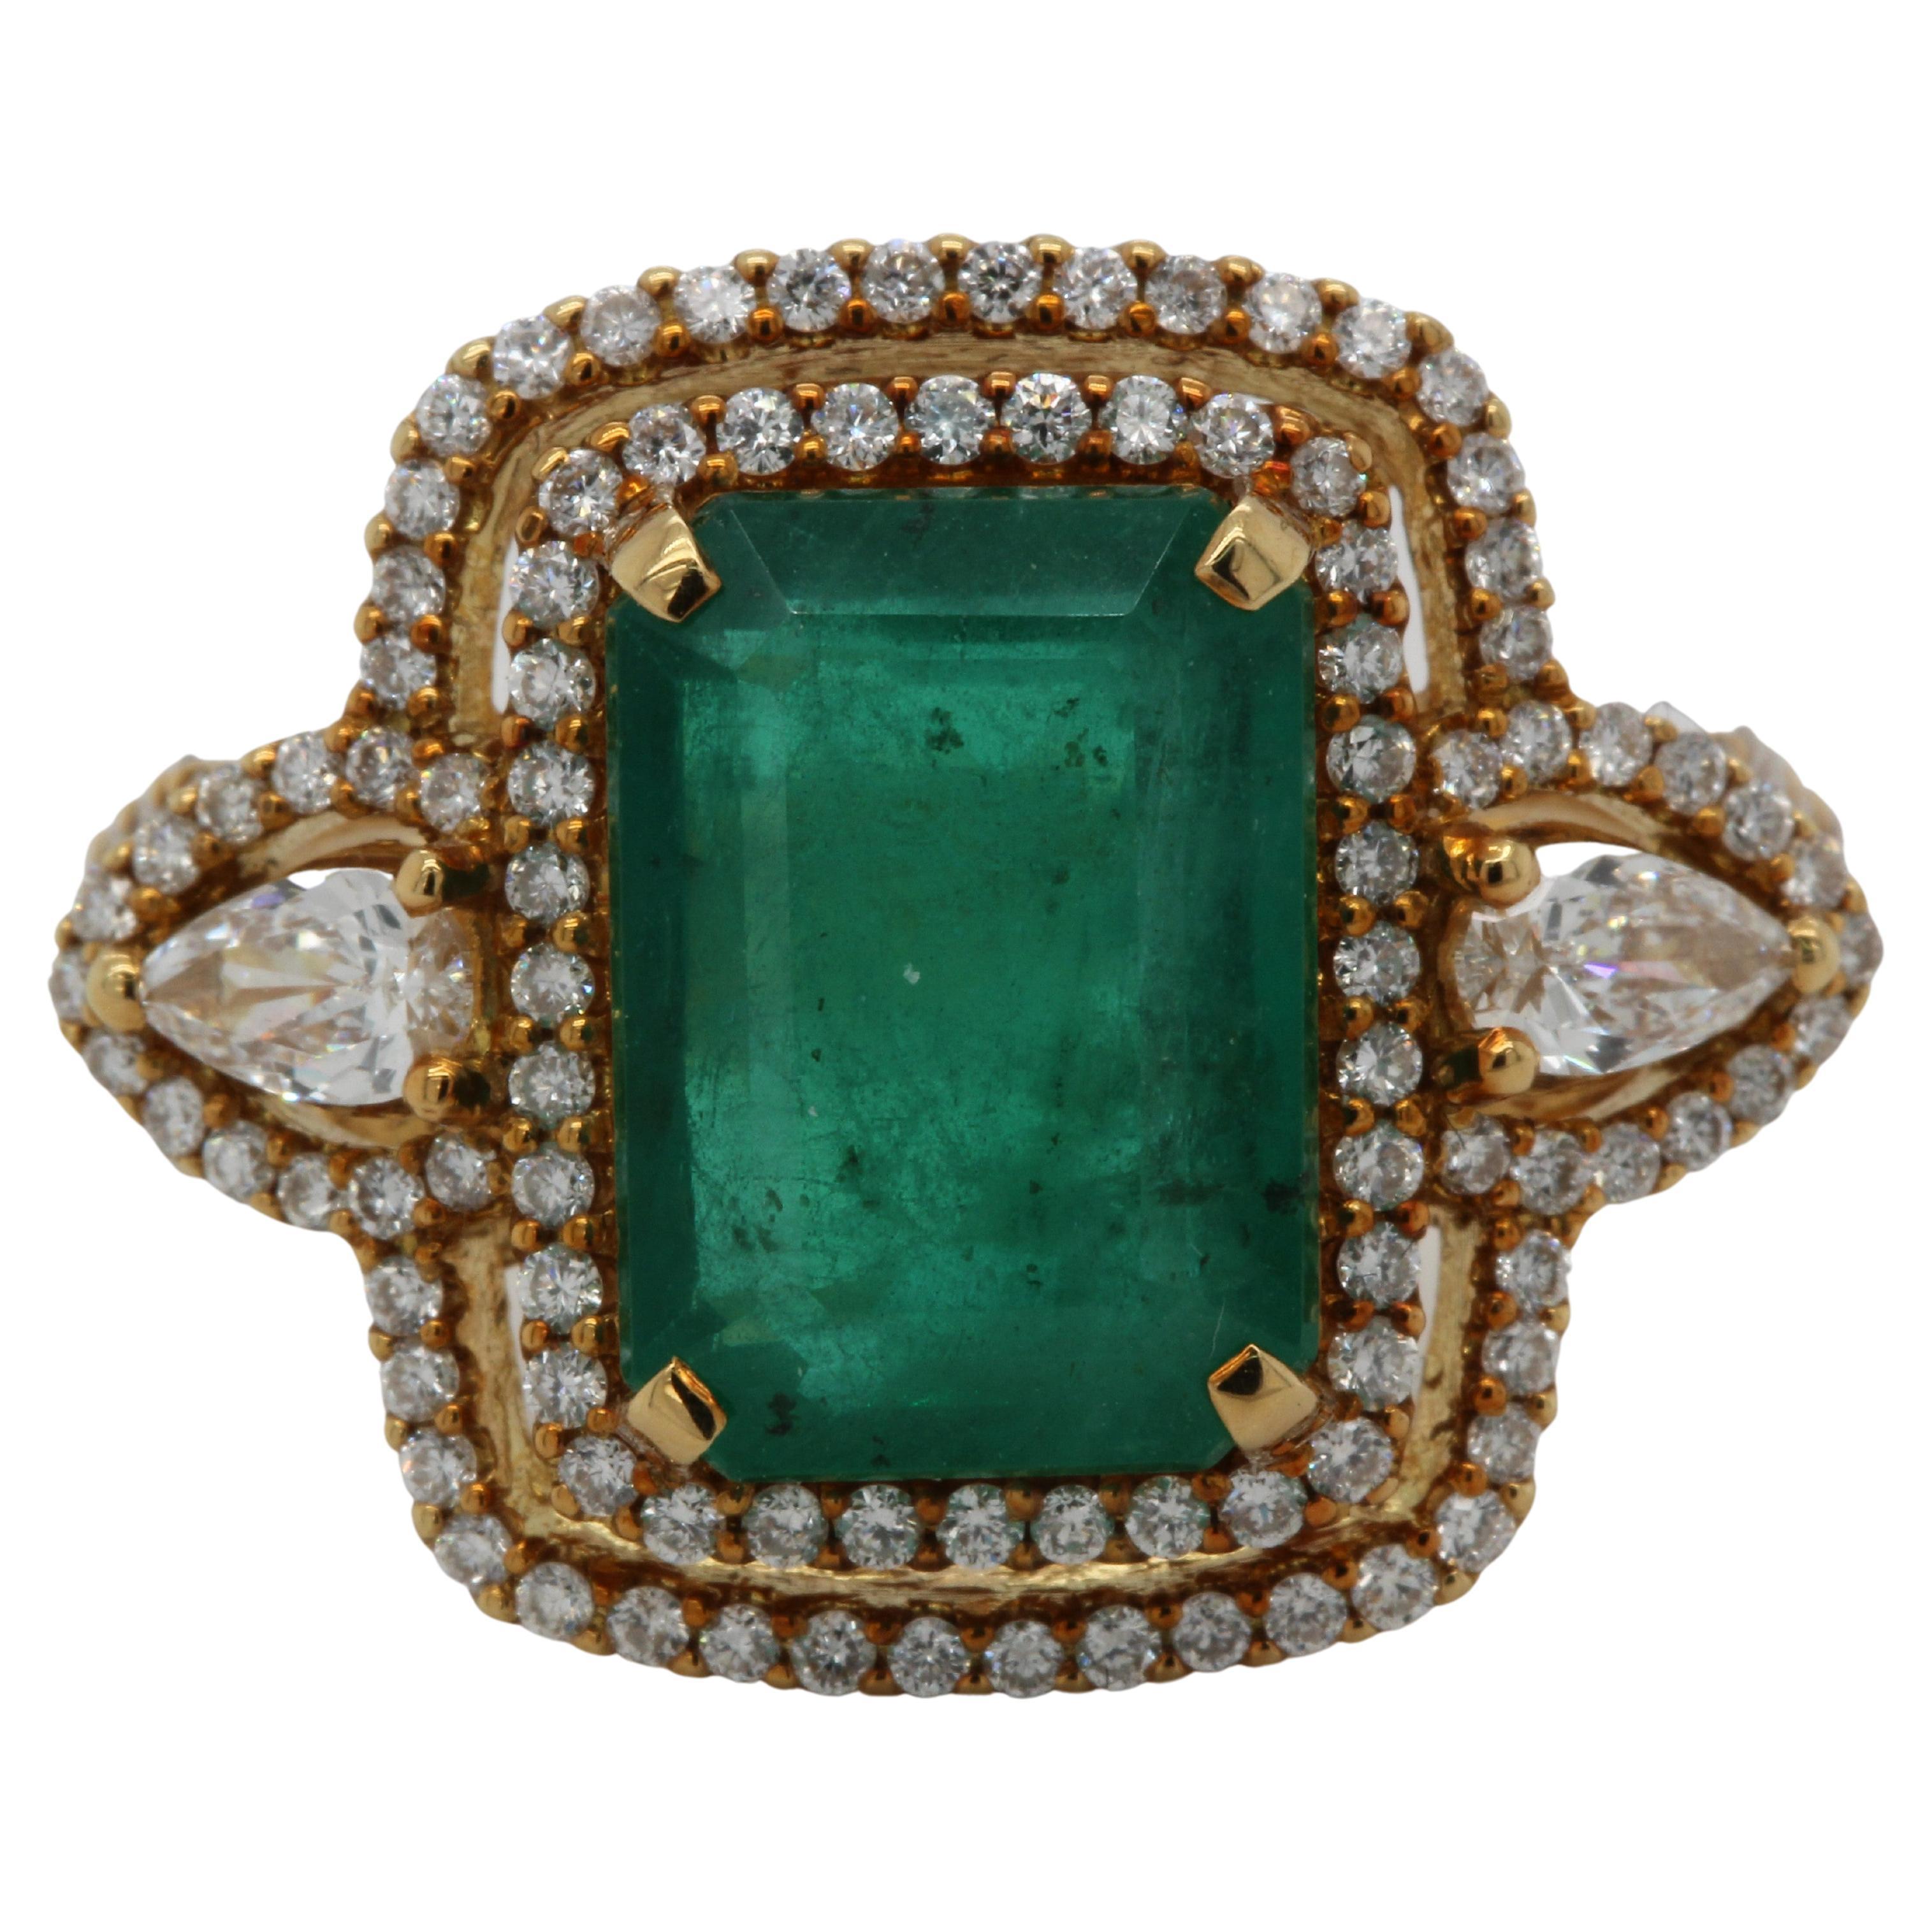 An elegant and luxurious addition to your collection, this 18K yellow gold emerald and diamond ring features a 4.59 carat emerald emerald cut in the center of the piece. Surrounded by 0.60 carat diamond round and 0.24 carat diamond pear, this ring